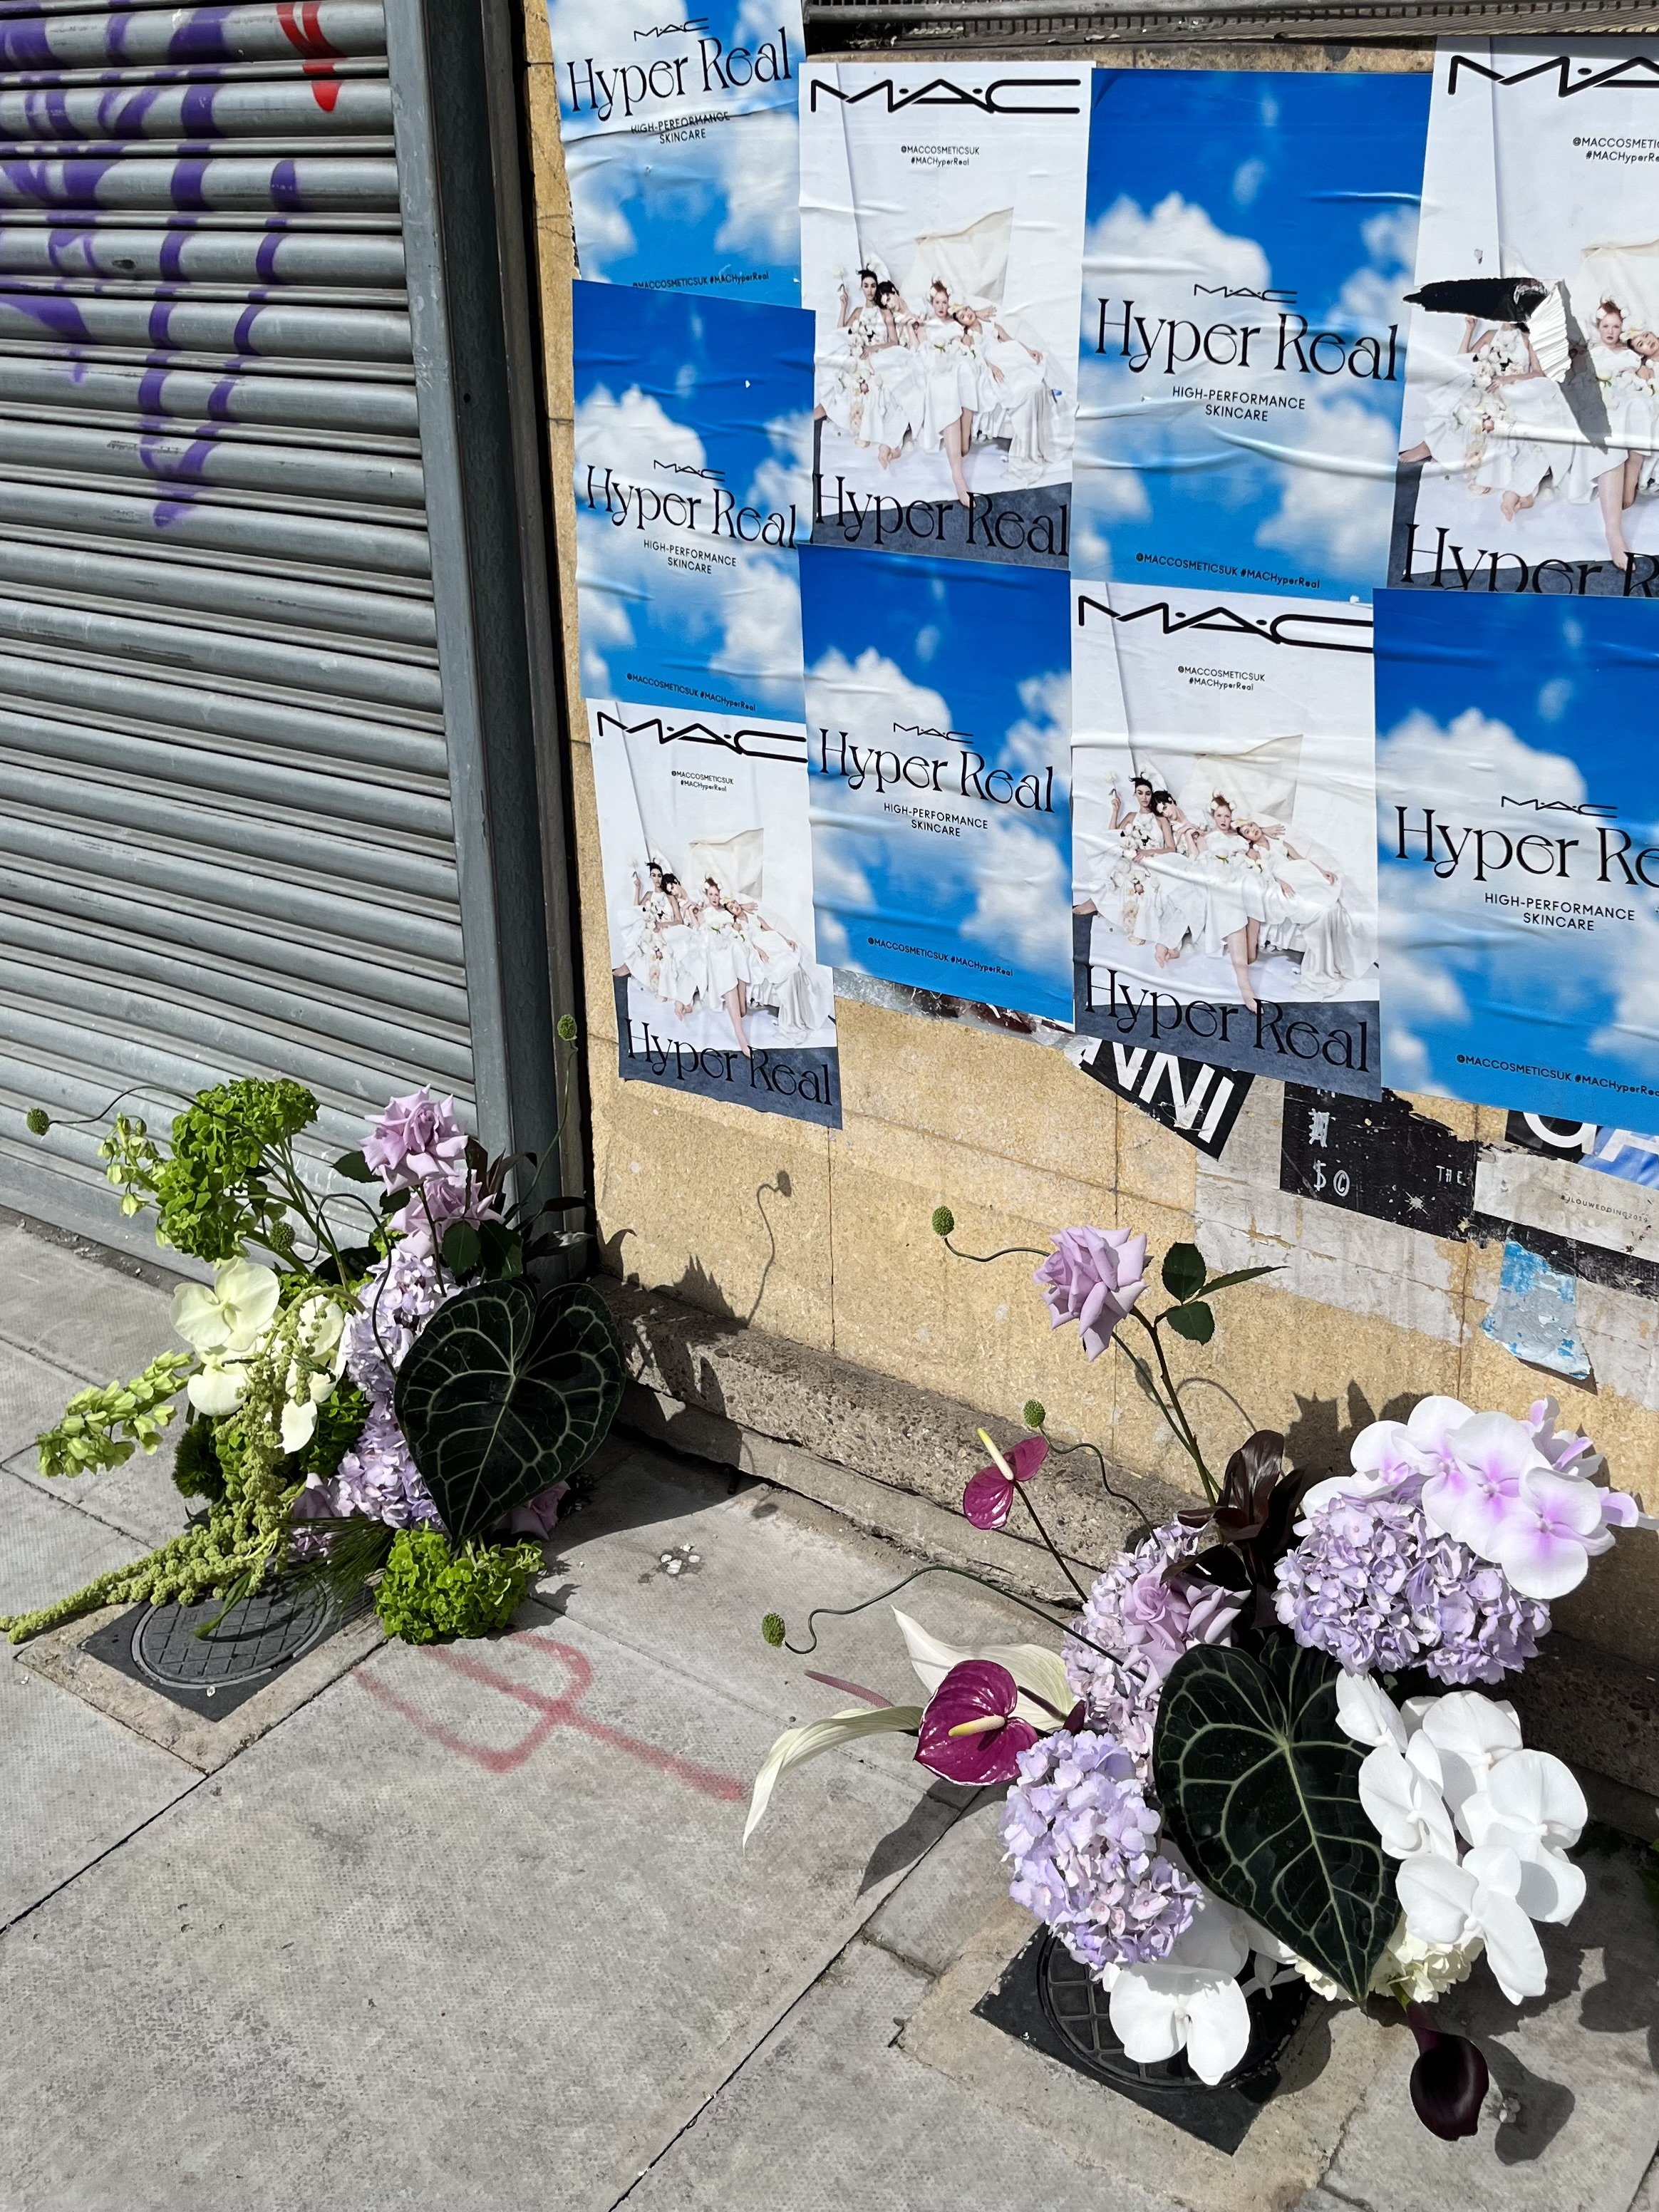  MAC make up posters stuck on a wall outside next to a metal shutter is the backdrop for two wedding floral displays which have been placed on the pavement. The bold wedding blooms in purple and white and the large green leaves create a striking disp